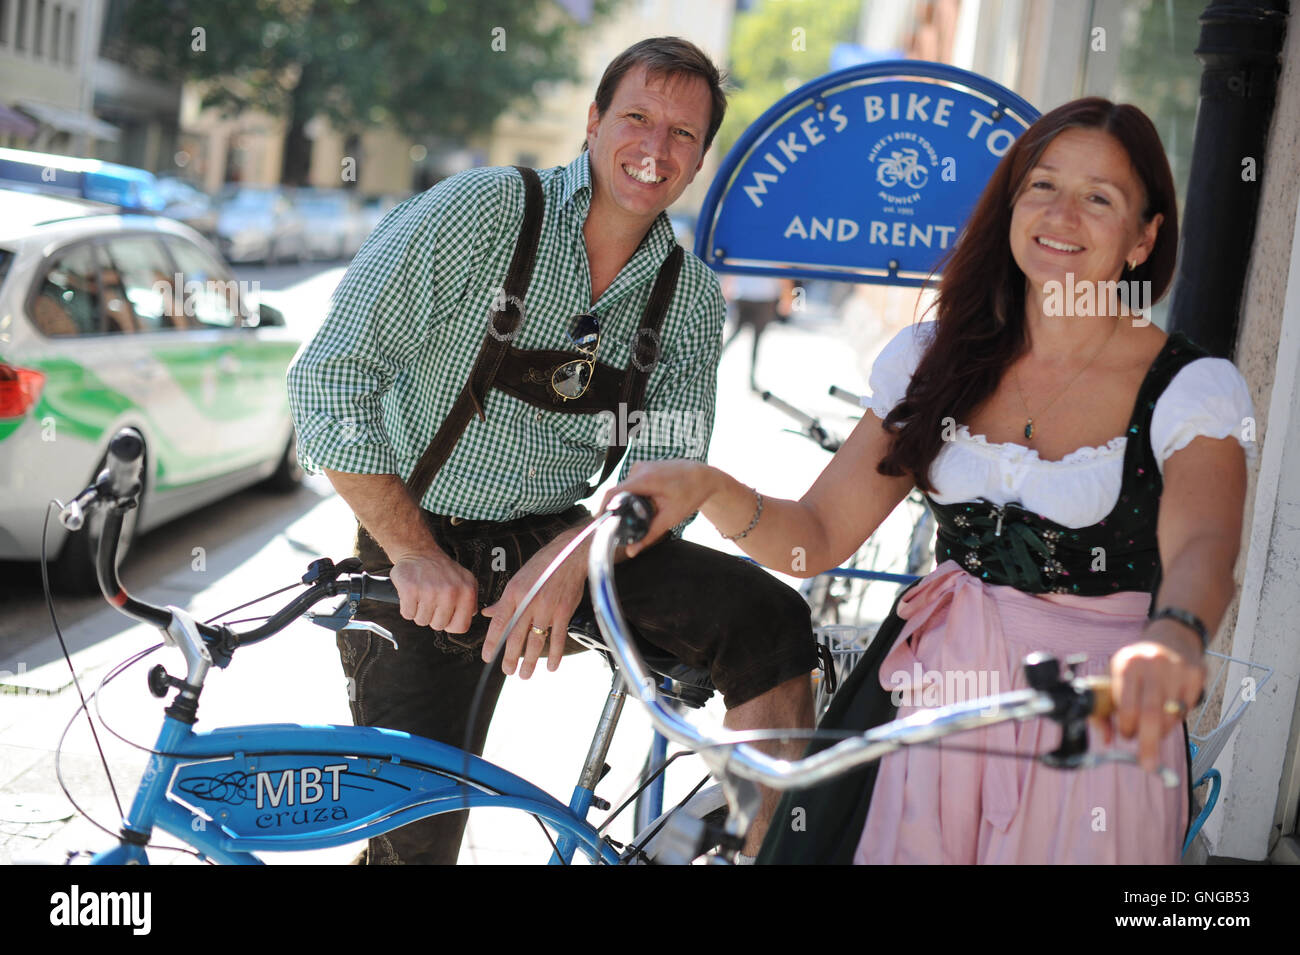 Mike's Bike Tours in Munich, 2014 Banque D'Images